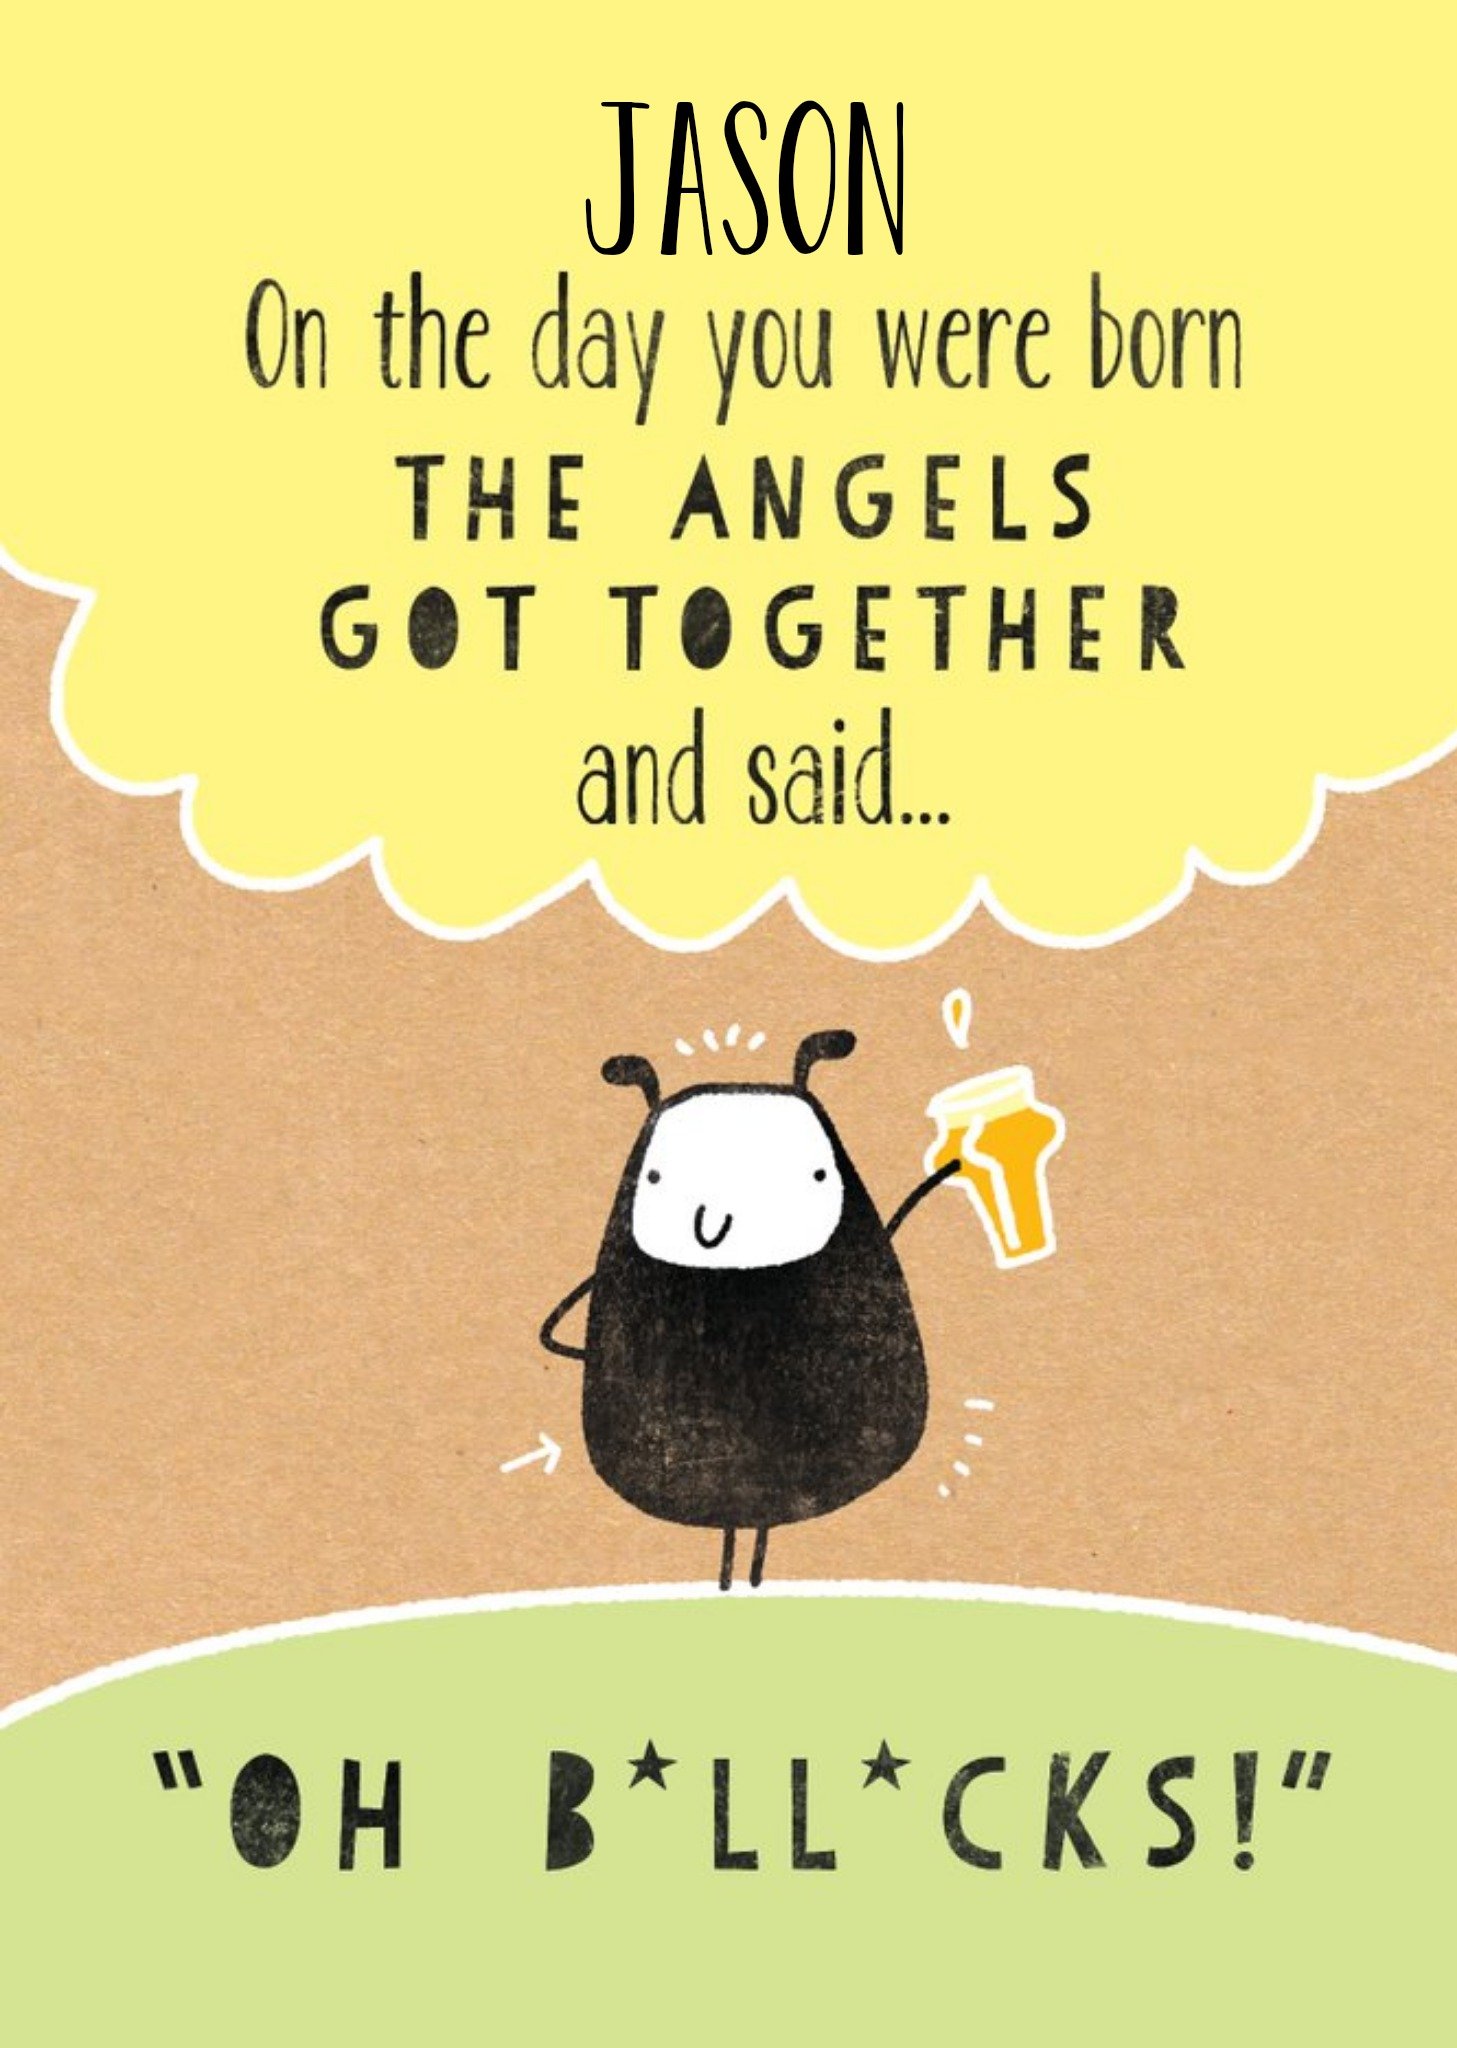 Moonpig The Angels Got Together Funny Personalised Happy Birthday Card, Large